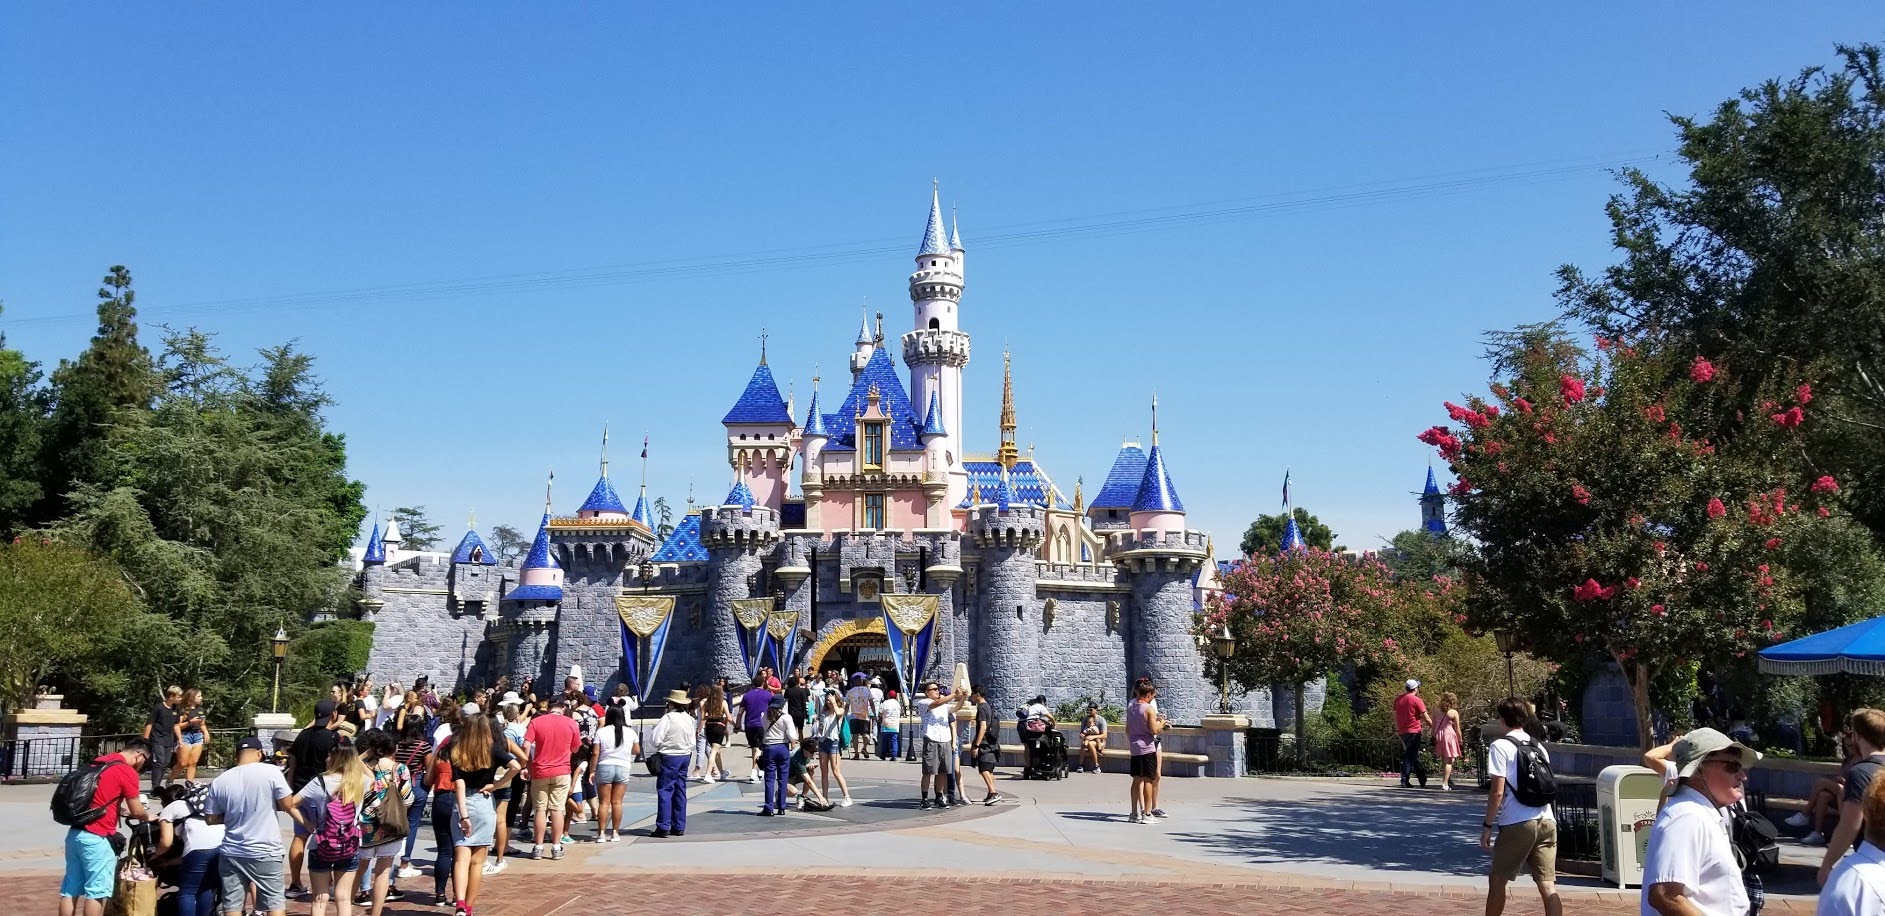 Disneyland Attractions and Dining Locations reopening on April 30th